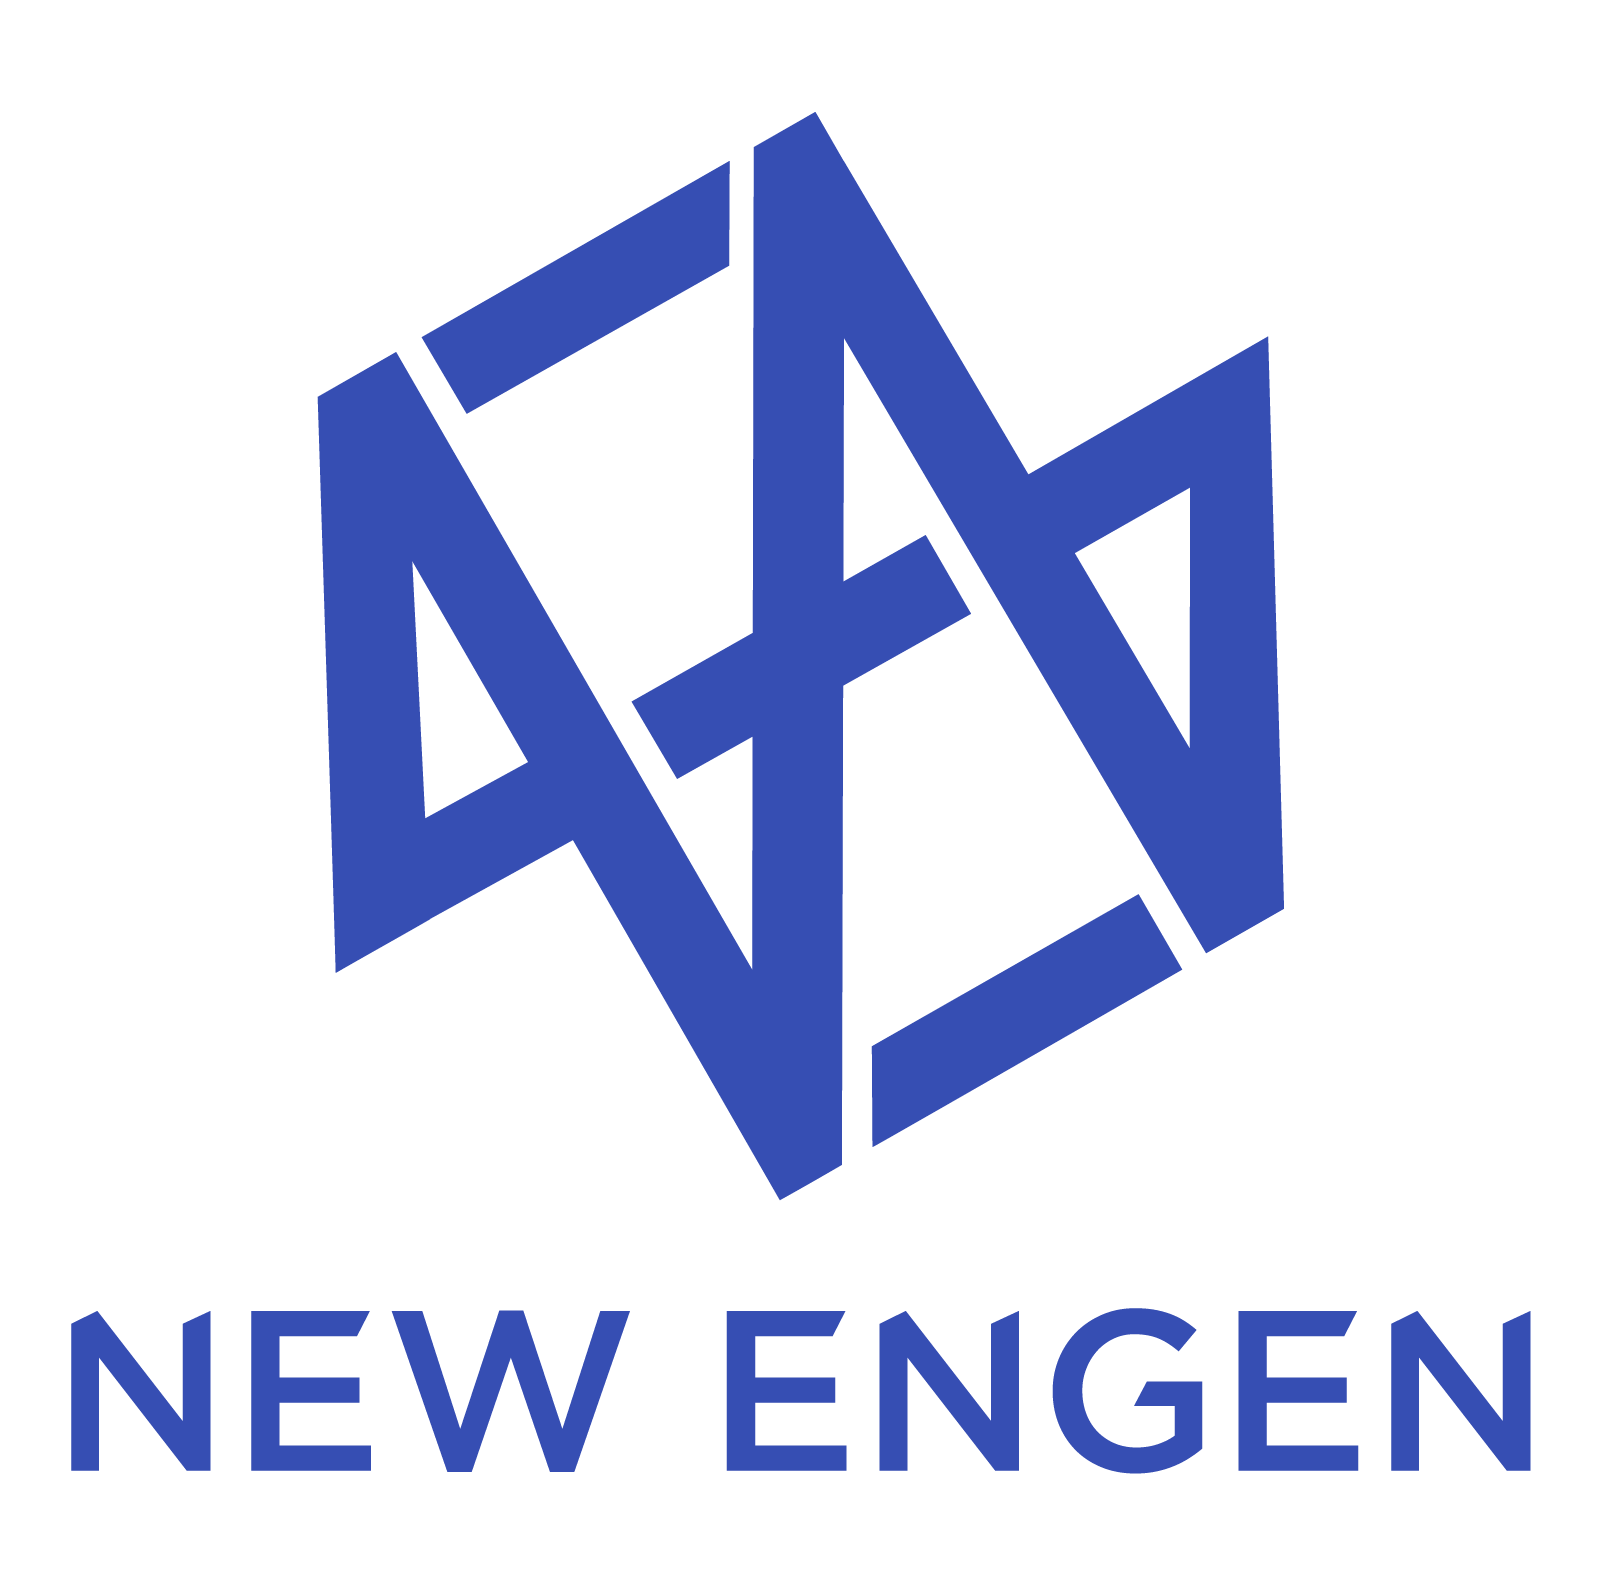 Performance Marketing Agency New Engen Acquires Disruptive and Innovative Partne..